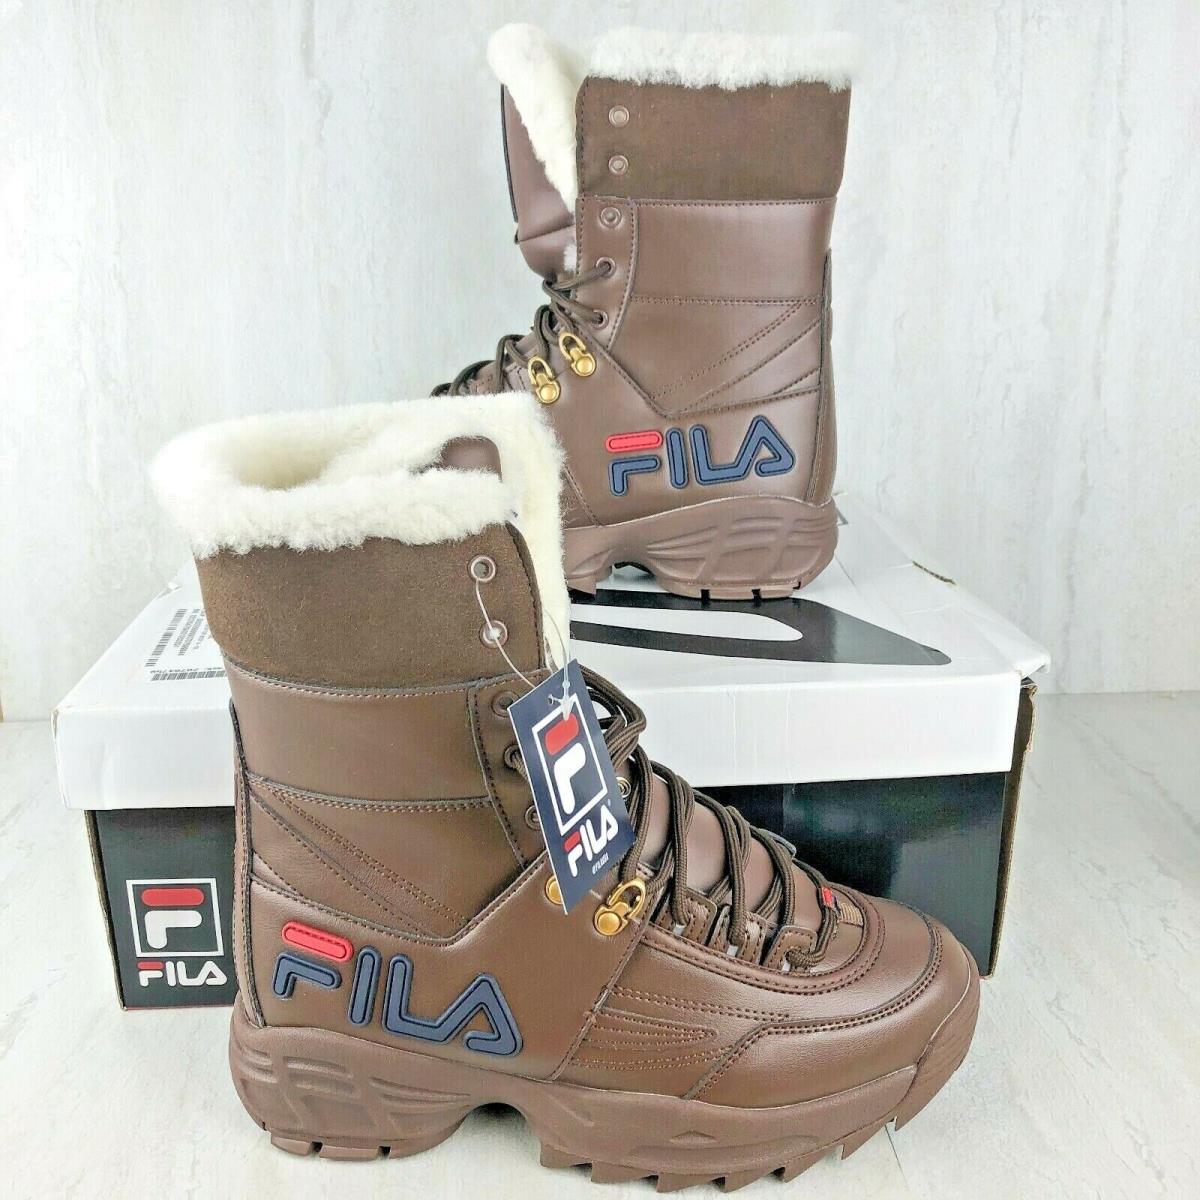 Fila Disruptor II Leather Boot Shoes Brown/navy/white 5HM00545-234 Women`s 8.5